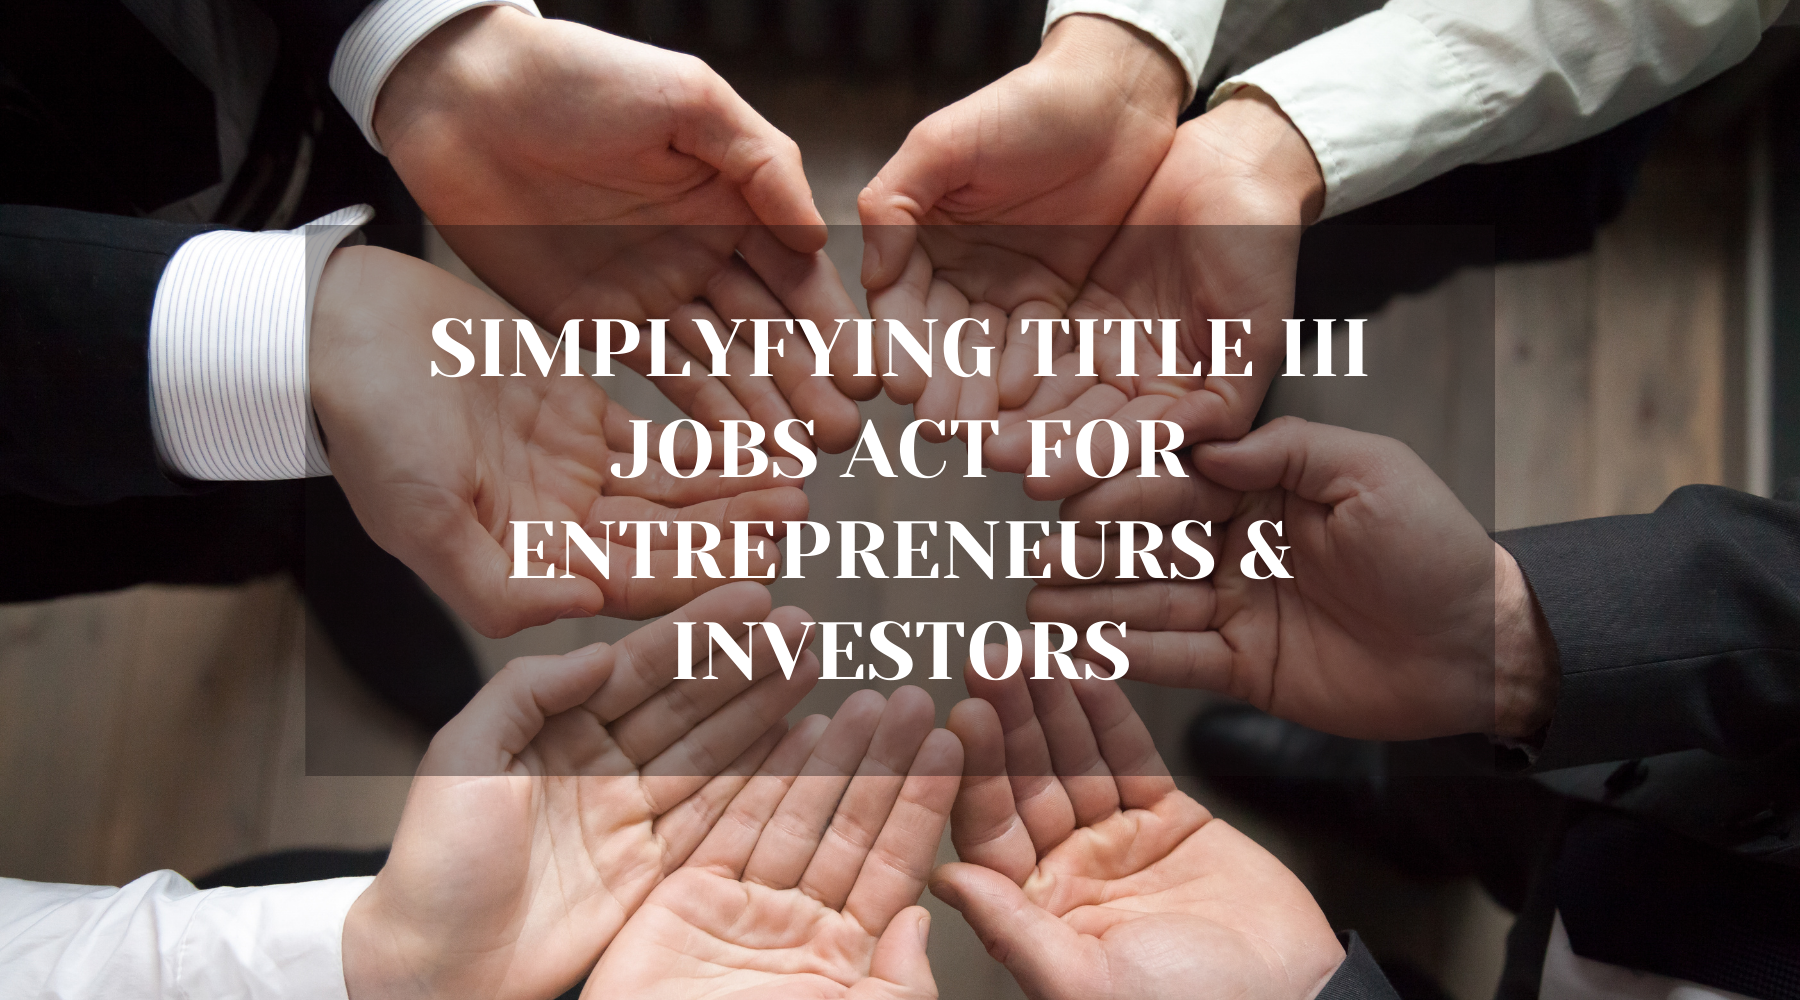 Simplifying Title III of JOBS Act for Entrepreneurs & Investors